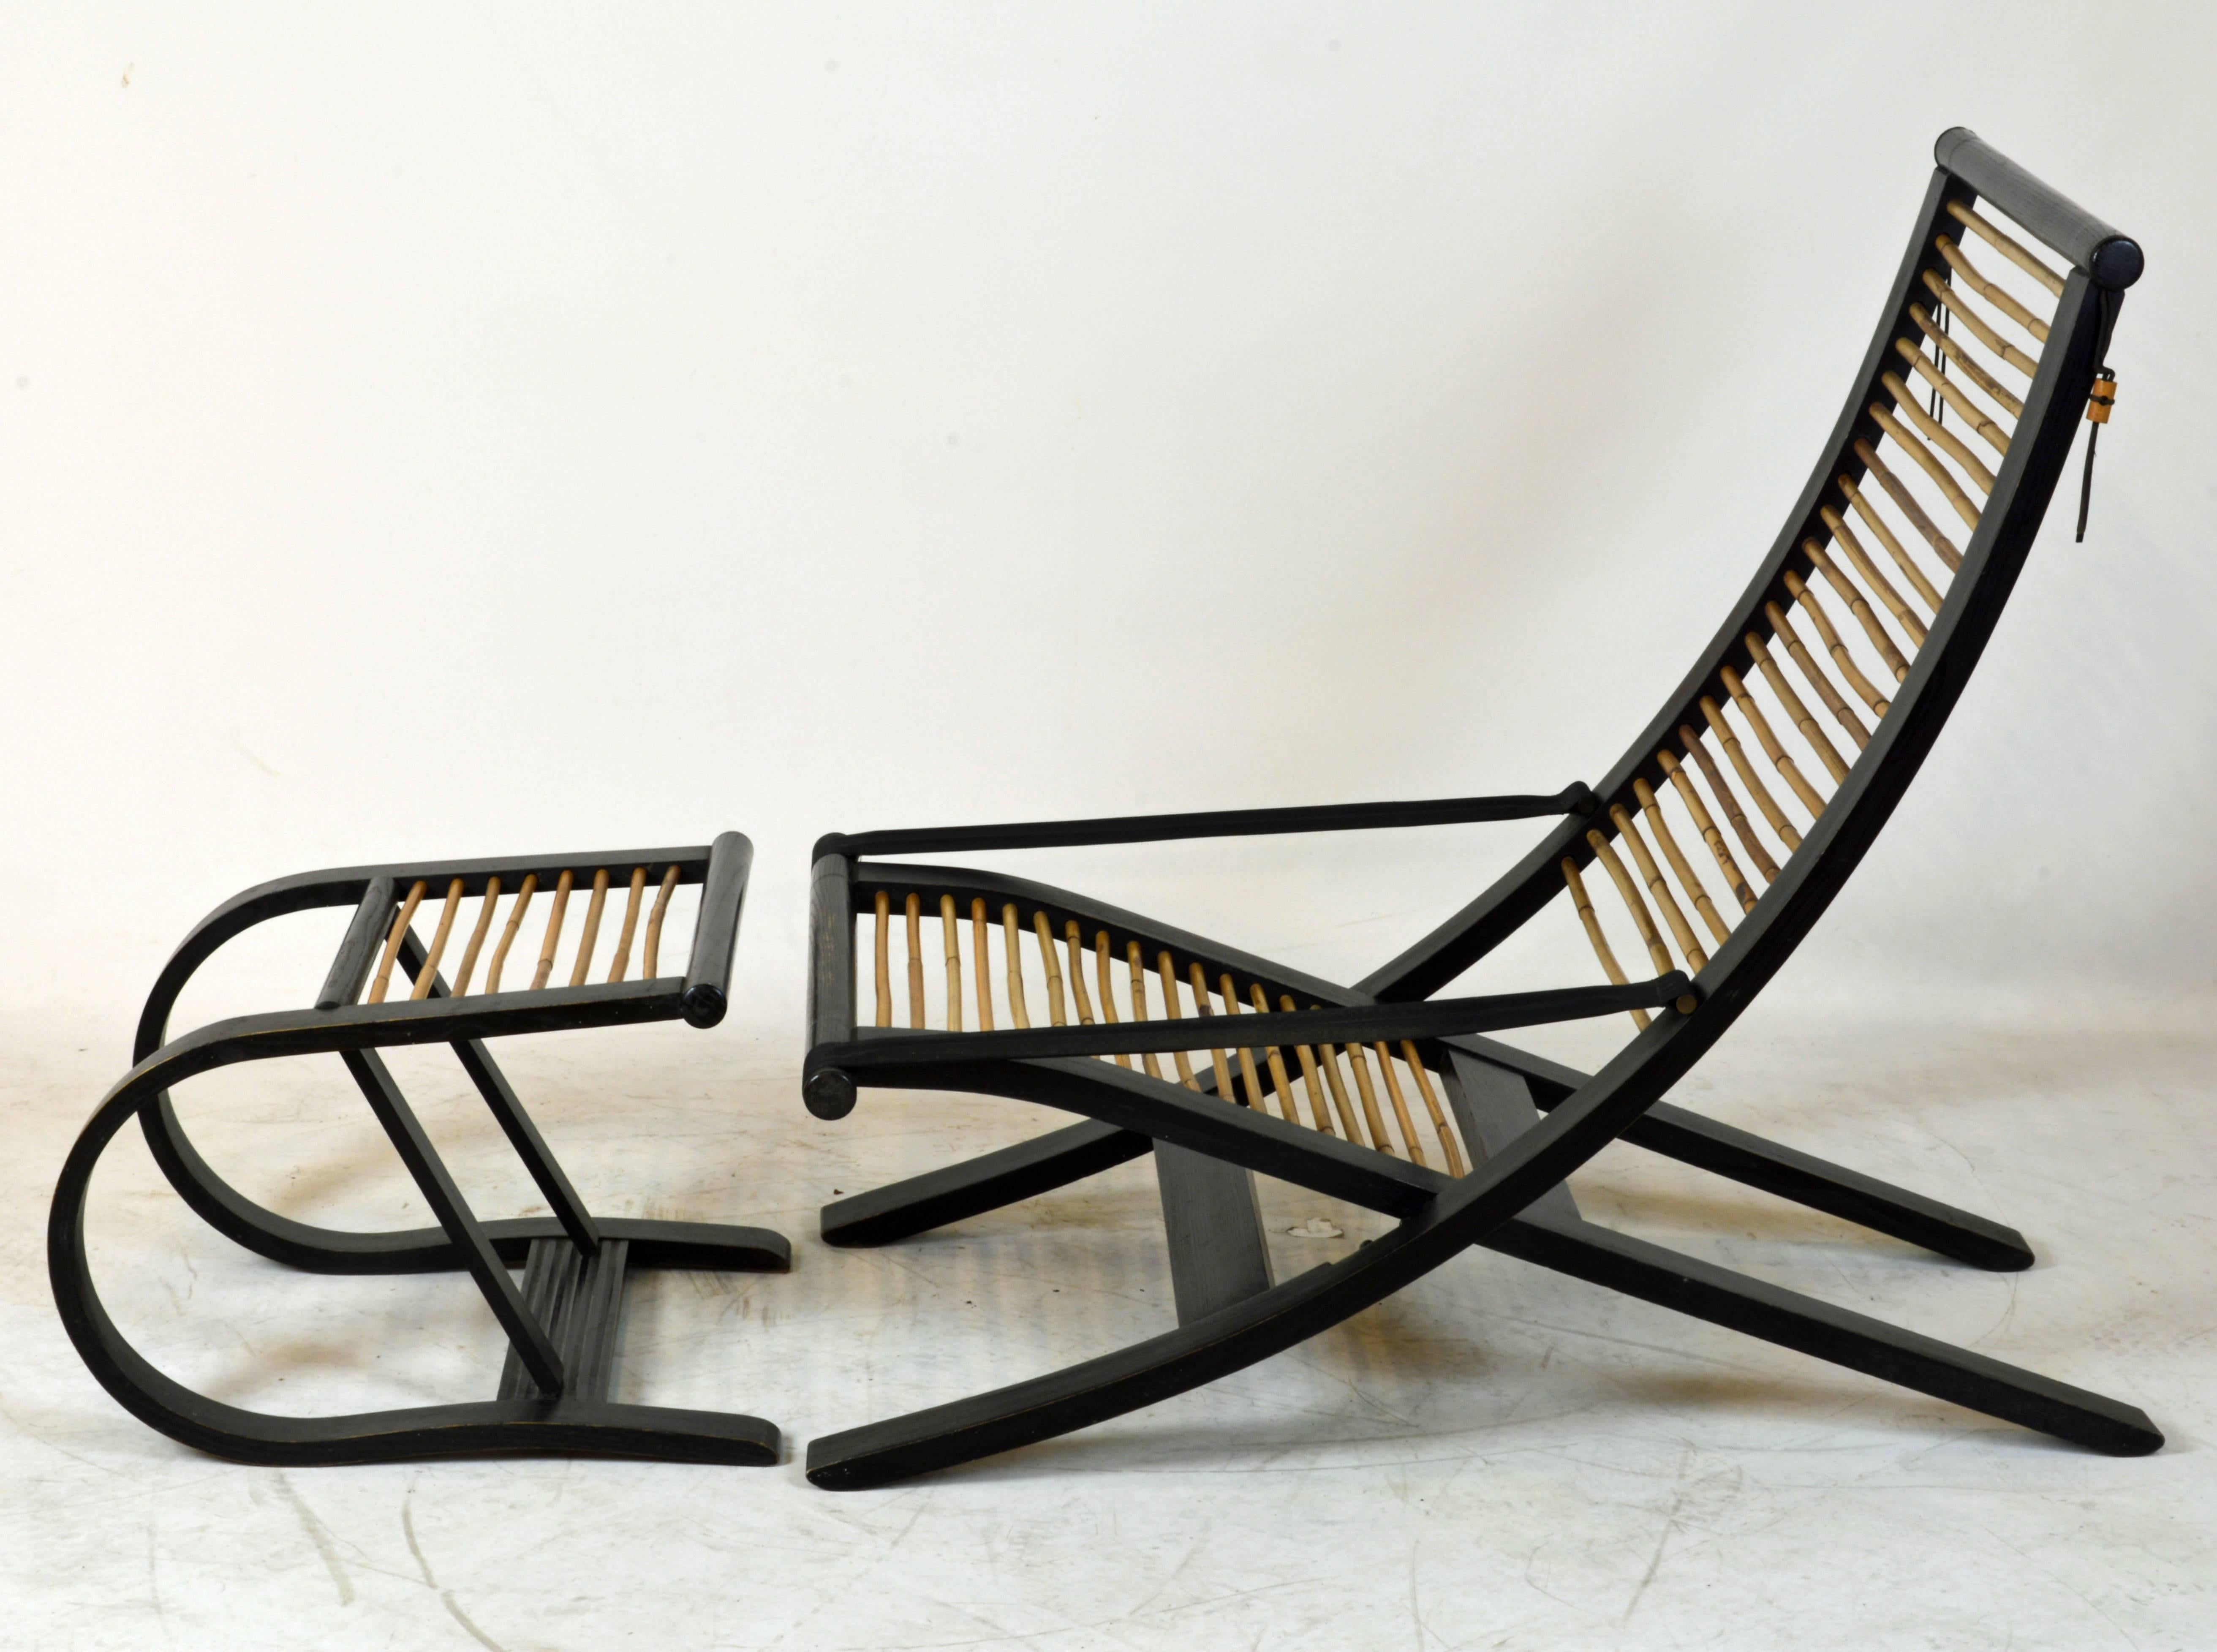 David Colwell is an award-winning and widely-exhibited well\sh furniture designer, producing a range of modern furniture using eco-friendly techniques and sound structural design.

Biography:
British, born in London 1944, lives in mid Wales.